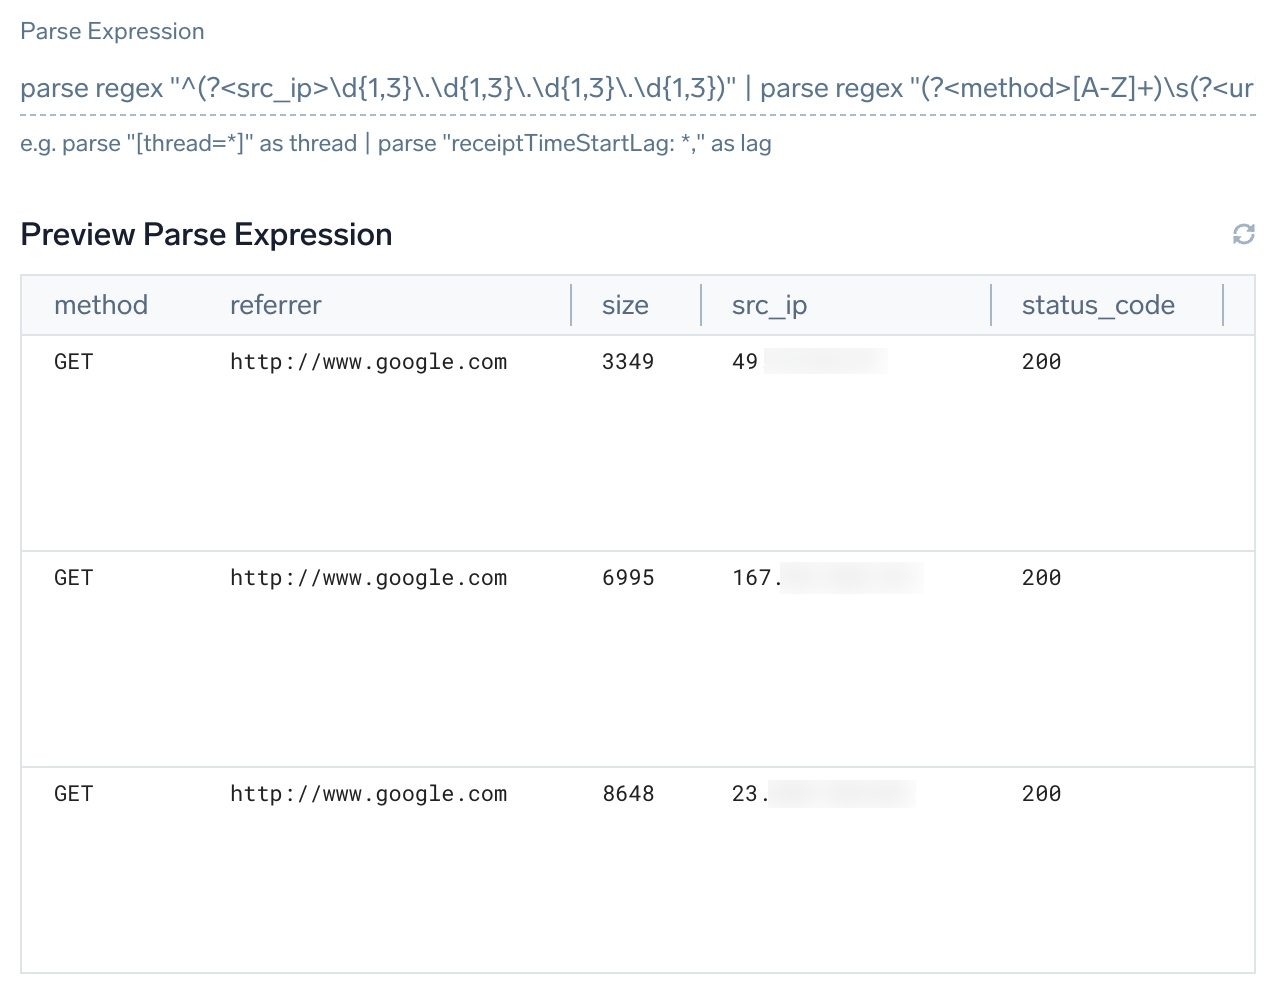 Preview parse expression